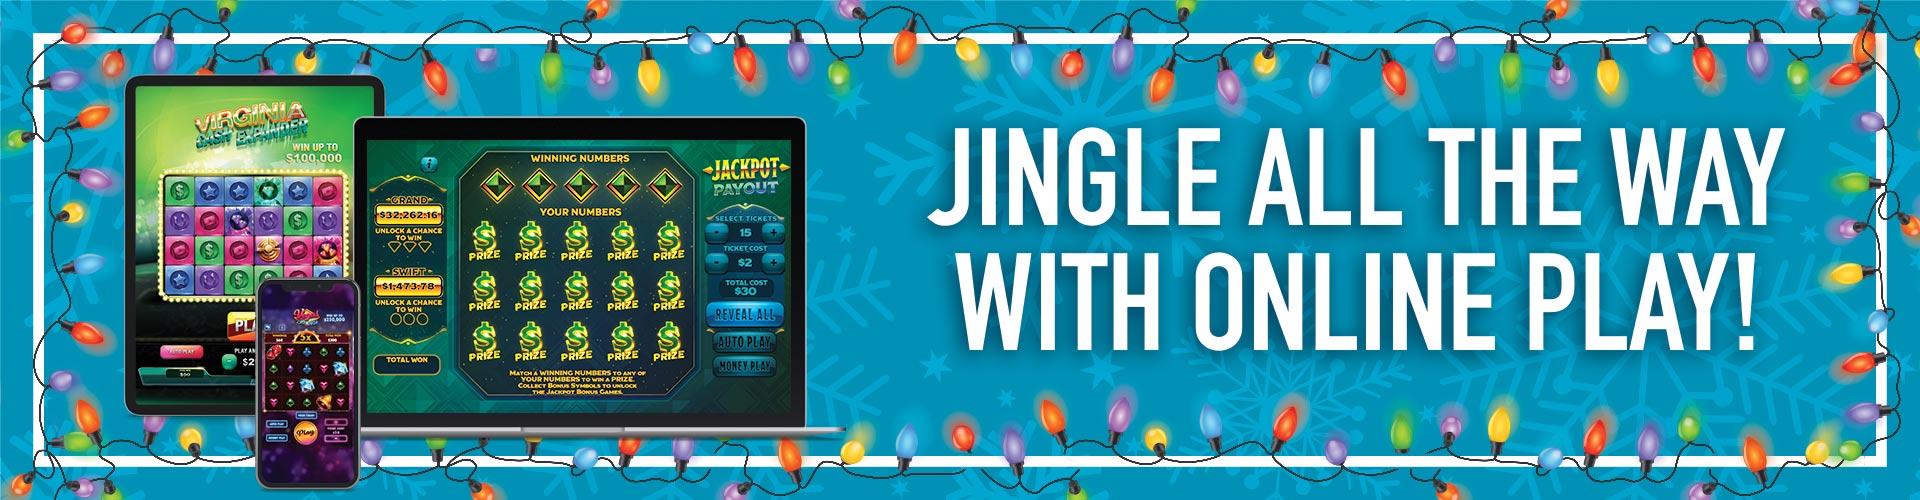 jingle all the way with online play